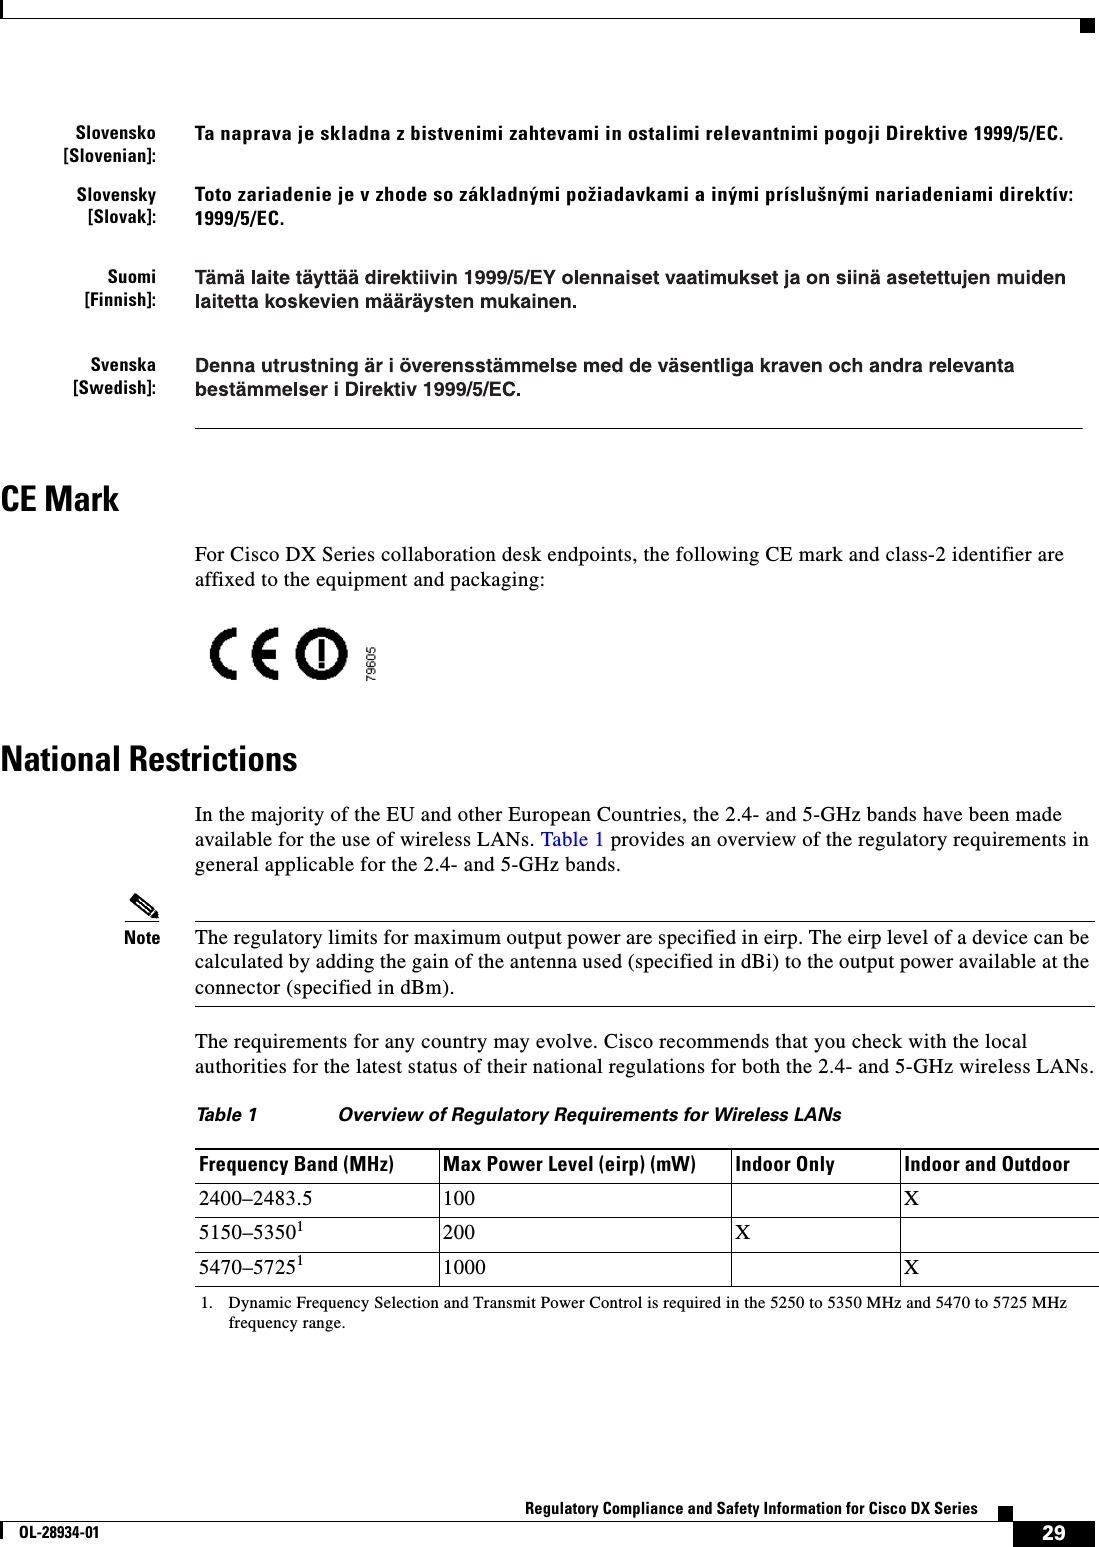  29Regulatory Compliance and Safety Information for Cisco DX SeriesOL-28934-01CE MarkFor Cisco DX Series collaboration desk endpoints, the following CE mark and class-2 identifier are affixed to the equipment and packaging:National RestrictionsIn the majority of the EU and other European Countries, the 2.4- and 5-GHz bands have been made available for the use of wireless LANs. Table 1 provides an overview of the regulatory requirements in general applicable for the 2.4- and 5-GHz bands.Note The regulatory limits for maximum output power are specified in eirp. The eirp level of a device can be calculated by adding the gain of the antenna used (specified in dBi) to the output power available at the connector (specified in dBm).The requirements for any country may evolve. Cisco recommends that you check with the local authorities for the latest status of their national regulations for both the 2.4- and 5-GHz wireless LANs.Slovensko[Slovenian]:Ta naprava je skladna z bistvenimi zahtevami in ostalimi relevantnimi pogoji Direktive 1999/5/EC.Slovensky[Slovak]:Toto zariadenie je v zhode so základnými požiadavkami a inými príslušnými nariadeniami direktív: 1999/5/EC. Suomi[Finnish]:Svenska[Swedish]:Table 1 Overview of Regulatory Requirements for Wireless LANsFrequency Band (MHz) Max Power Level (eirp) (mW) Indoor Only Indoor and Outdoor2400–2483.5 100 X5150–535011. Dynamic Frequency Selection and Transmit Power Control is required in the 5250 to 5350 MHz and 5470 to 5725 MHz frequency range.200 X5470–572511000 X